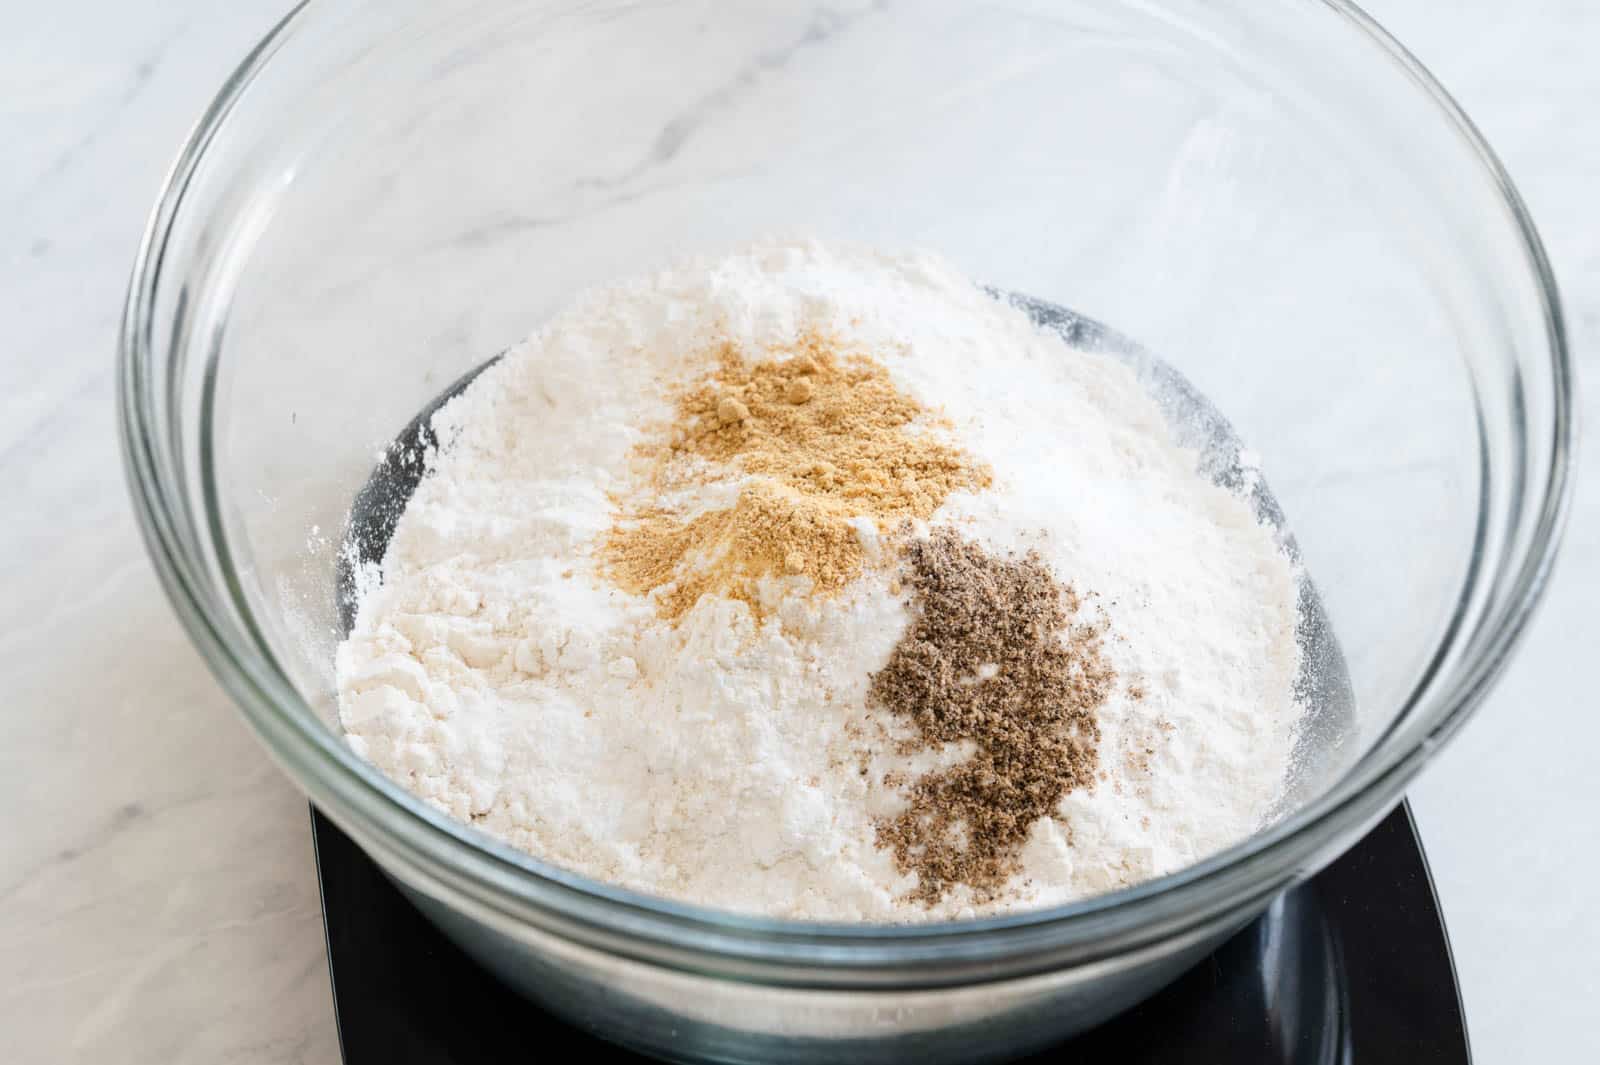 Flour blend and spices

